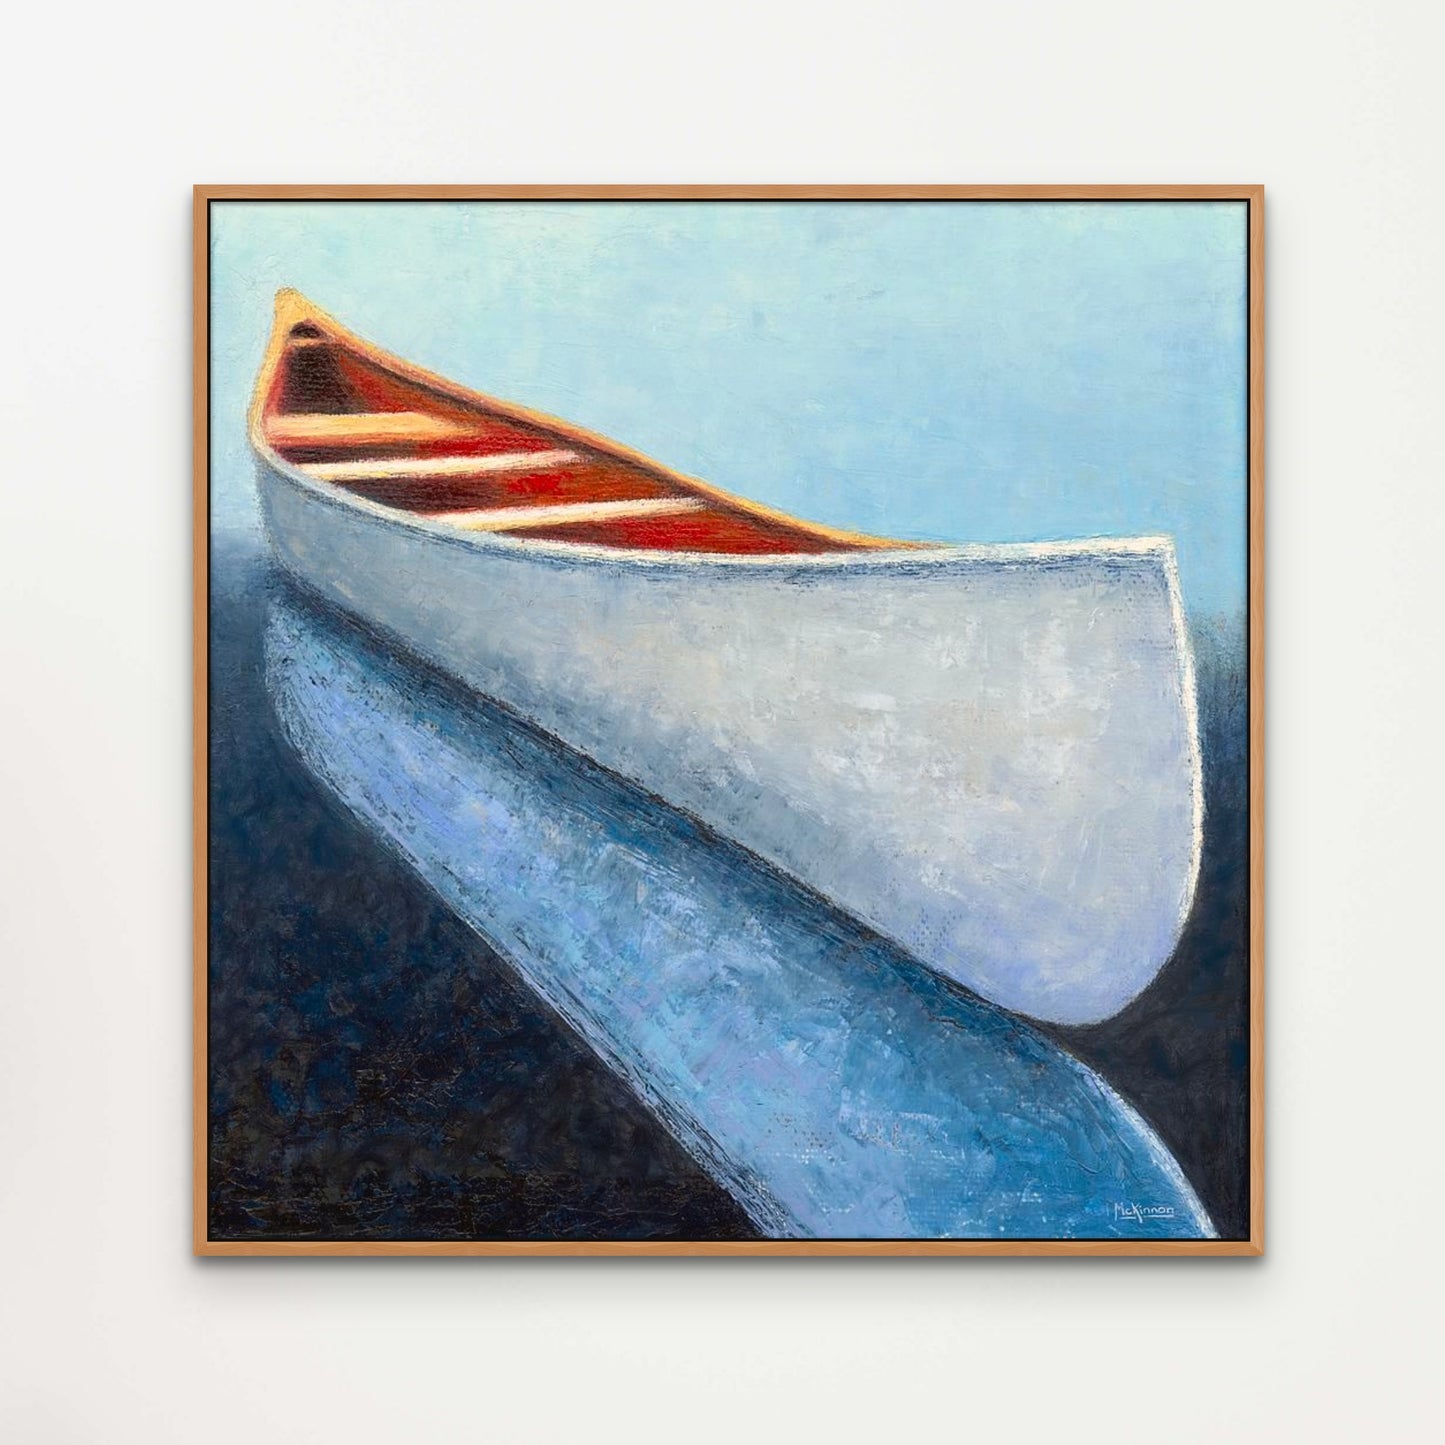 A coastal painting of a white canoe reflected in dark, navy blue water by Canadian artist Catherine McKinnon. This giclee print of the wall art is framed in cherry wood and mounted on a light grey wall as modern farmhouse style wall decor.